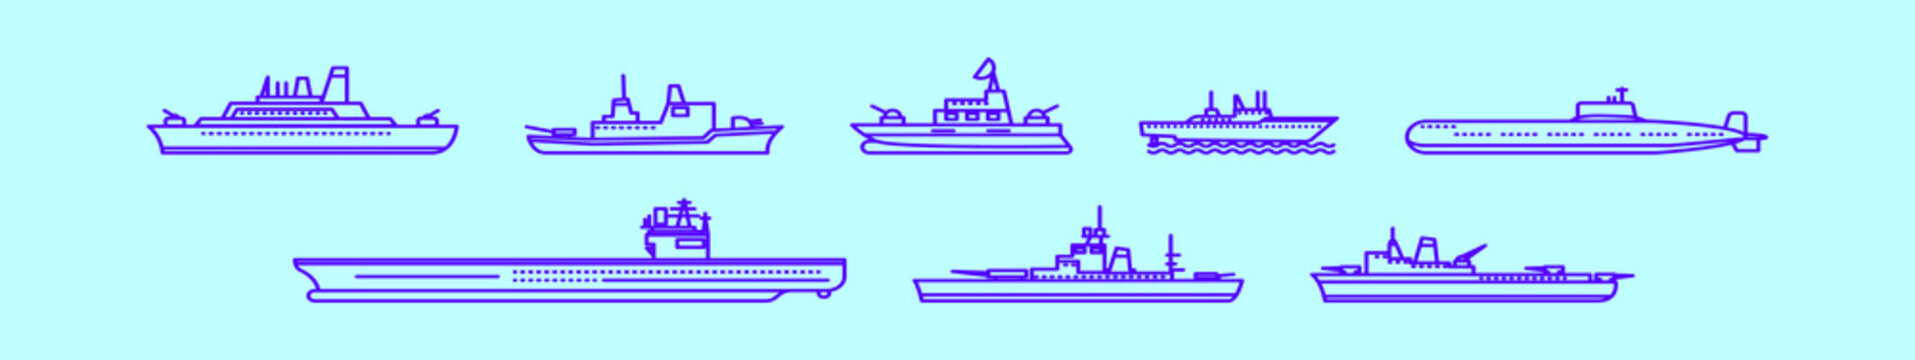 set of marine ships cartoon icon design template with various models. vector illustration isolated on blue background